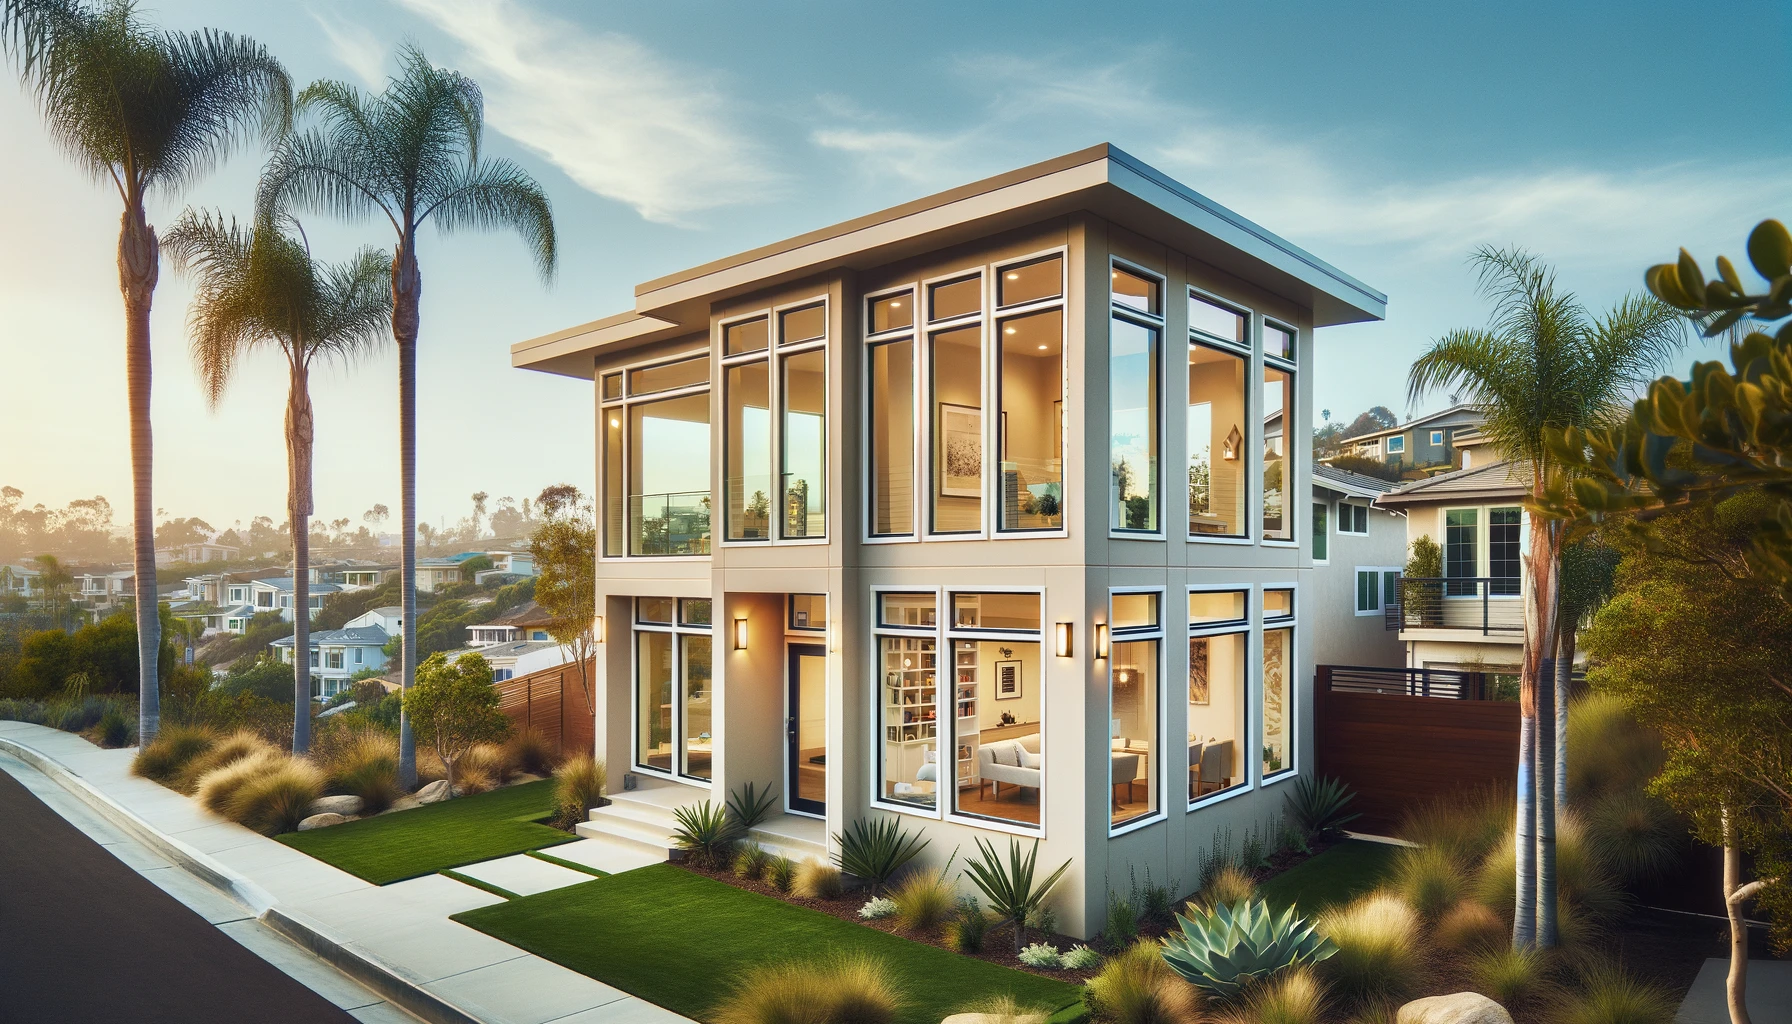 Modern San Diego home with affordable, large vinyl windows, surrounded by lush greenery under a clear blue sky.